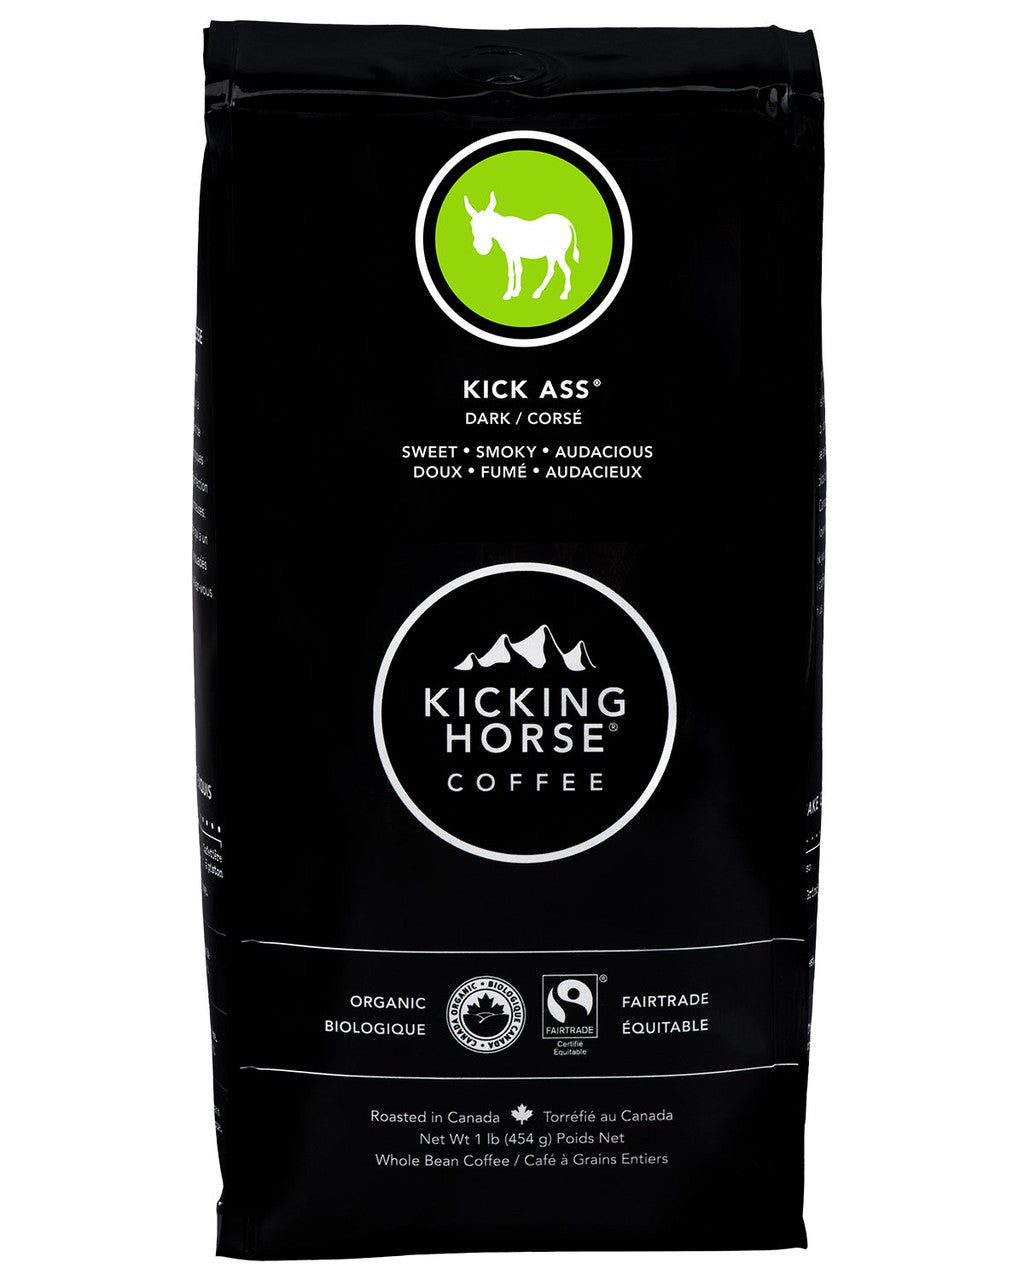 Kicking Horse Coffee, Kick Ass, Whole Bean Coffee, 454g/1 lb {Imported from Canada}